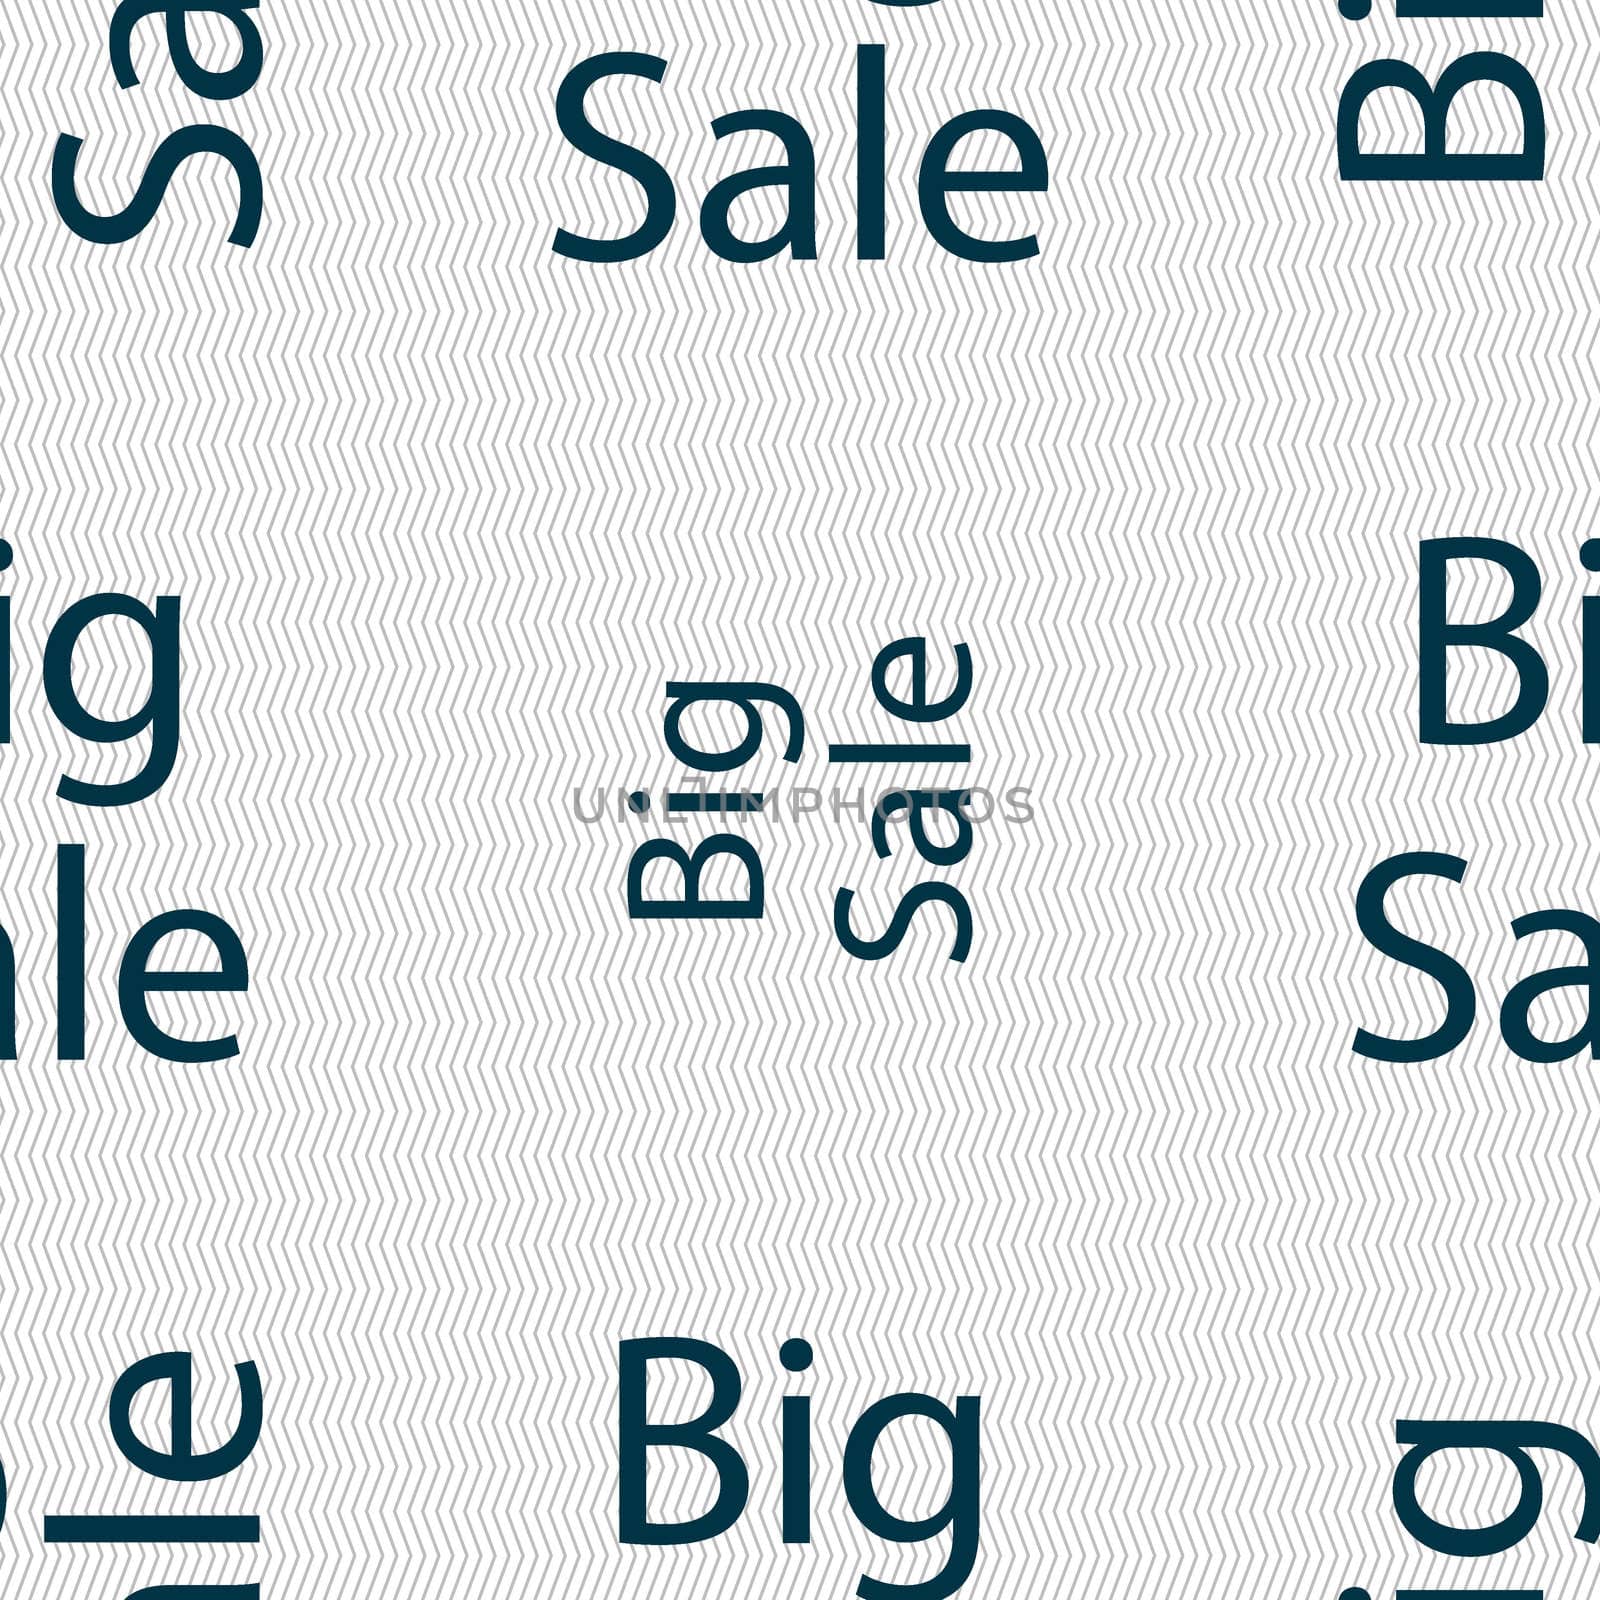 Big sale sign icon. Special offer symbol. Seamless abstract background with geometric shapes.  by serhii_lohvyniuk